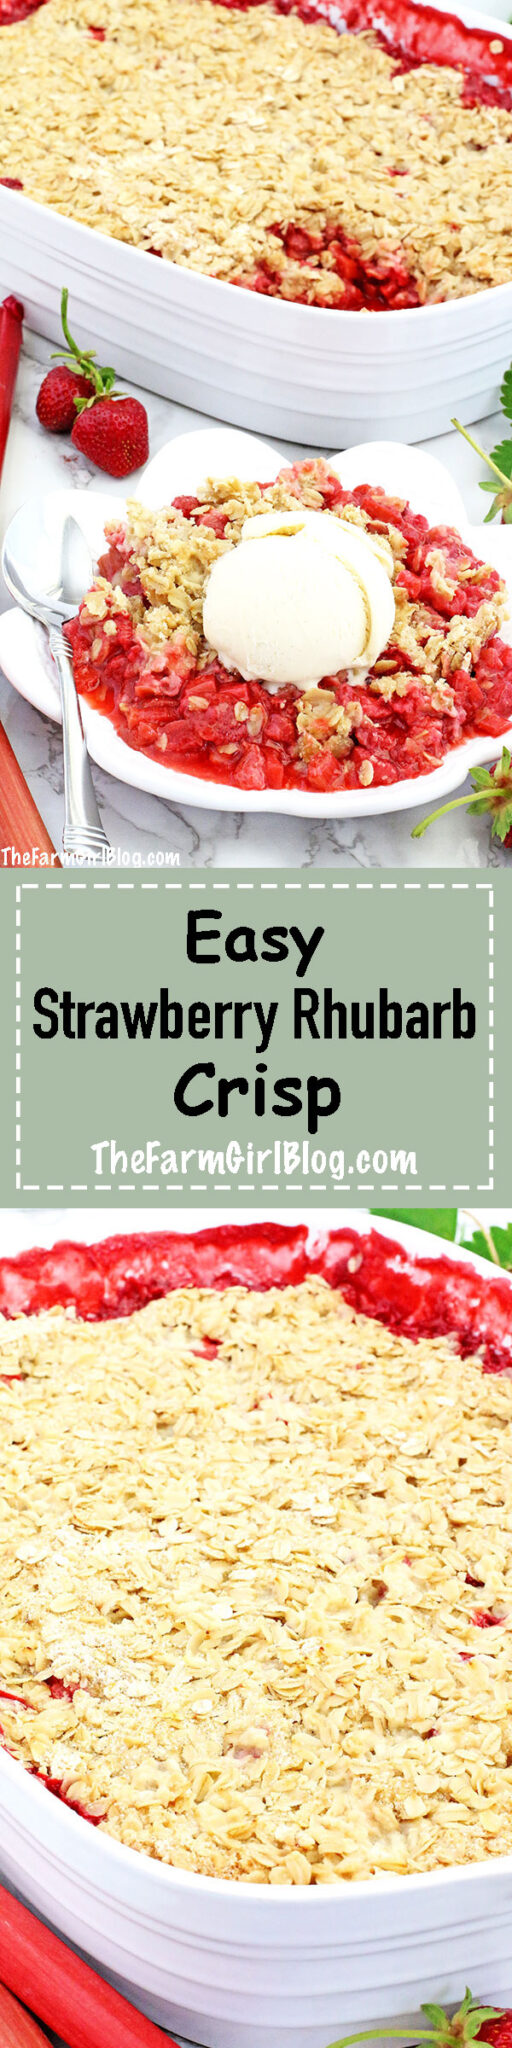 This Easy Strawberry Rhubarb Crisp Recipe is much easier to make and healthier than a pie. The crisp is loaded with homegrown strawberries and rhubarb. It is topped with delicious lightly sweetened brown sugar oats crumble. It’s hard to resist from this crisp made with homegrown fruit, which makes this recipe special and super tasty. 